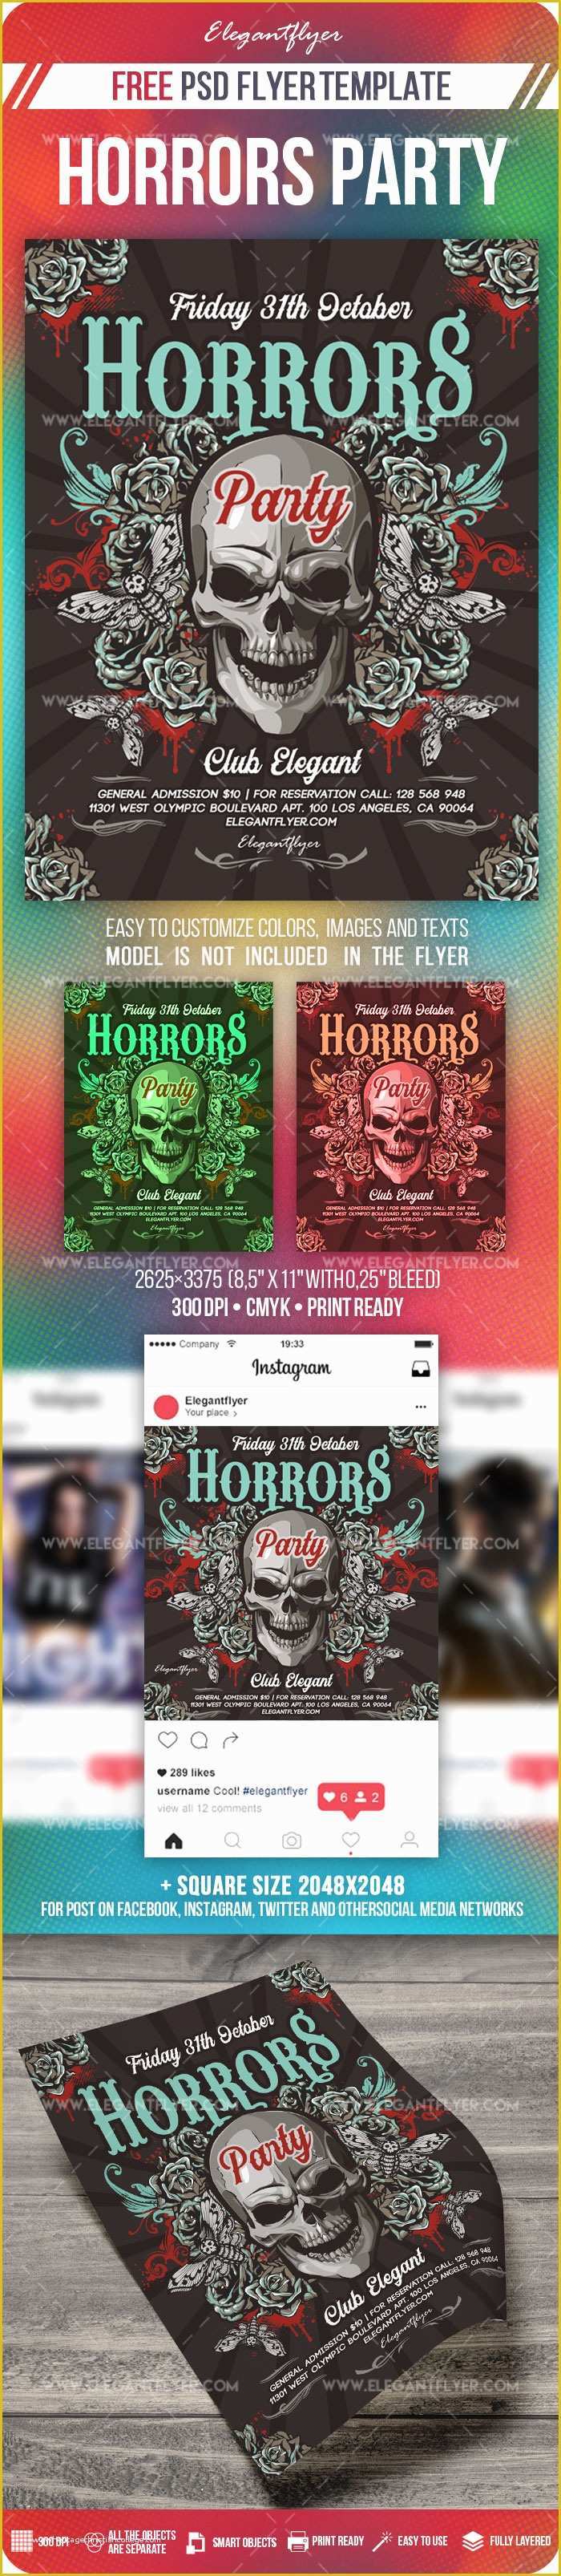 Free Instagram Flyer Template Of Horrors Party – Free Flyer Psd Template Instagram